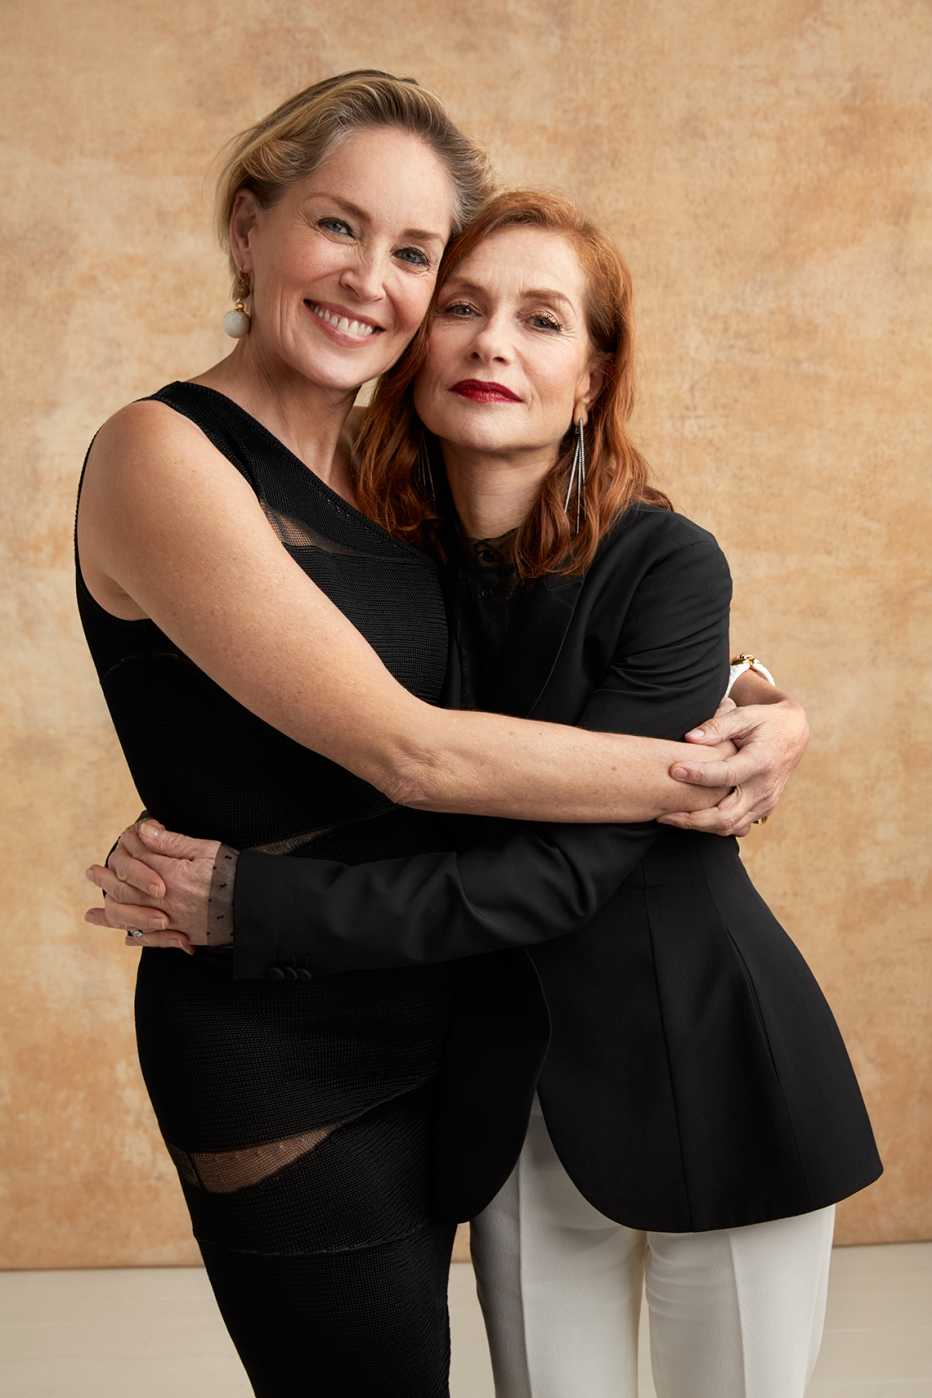 Sharon Stone and Isabelle Huppert at the 16th Annual AARP The Magazine's Movies for Grownups Awards